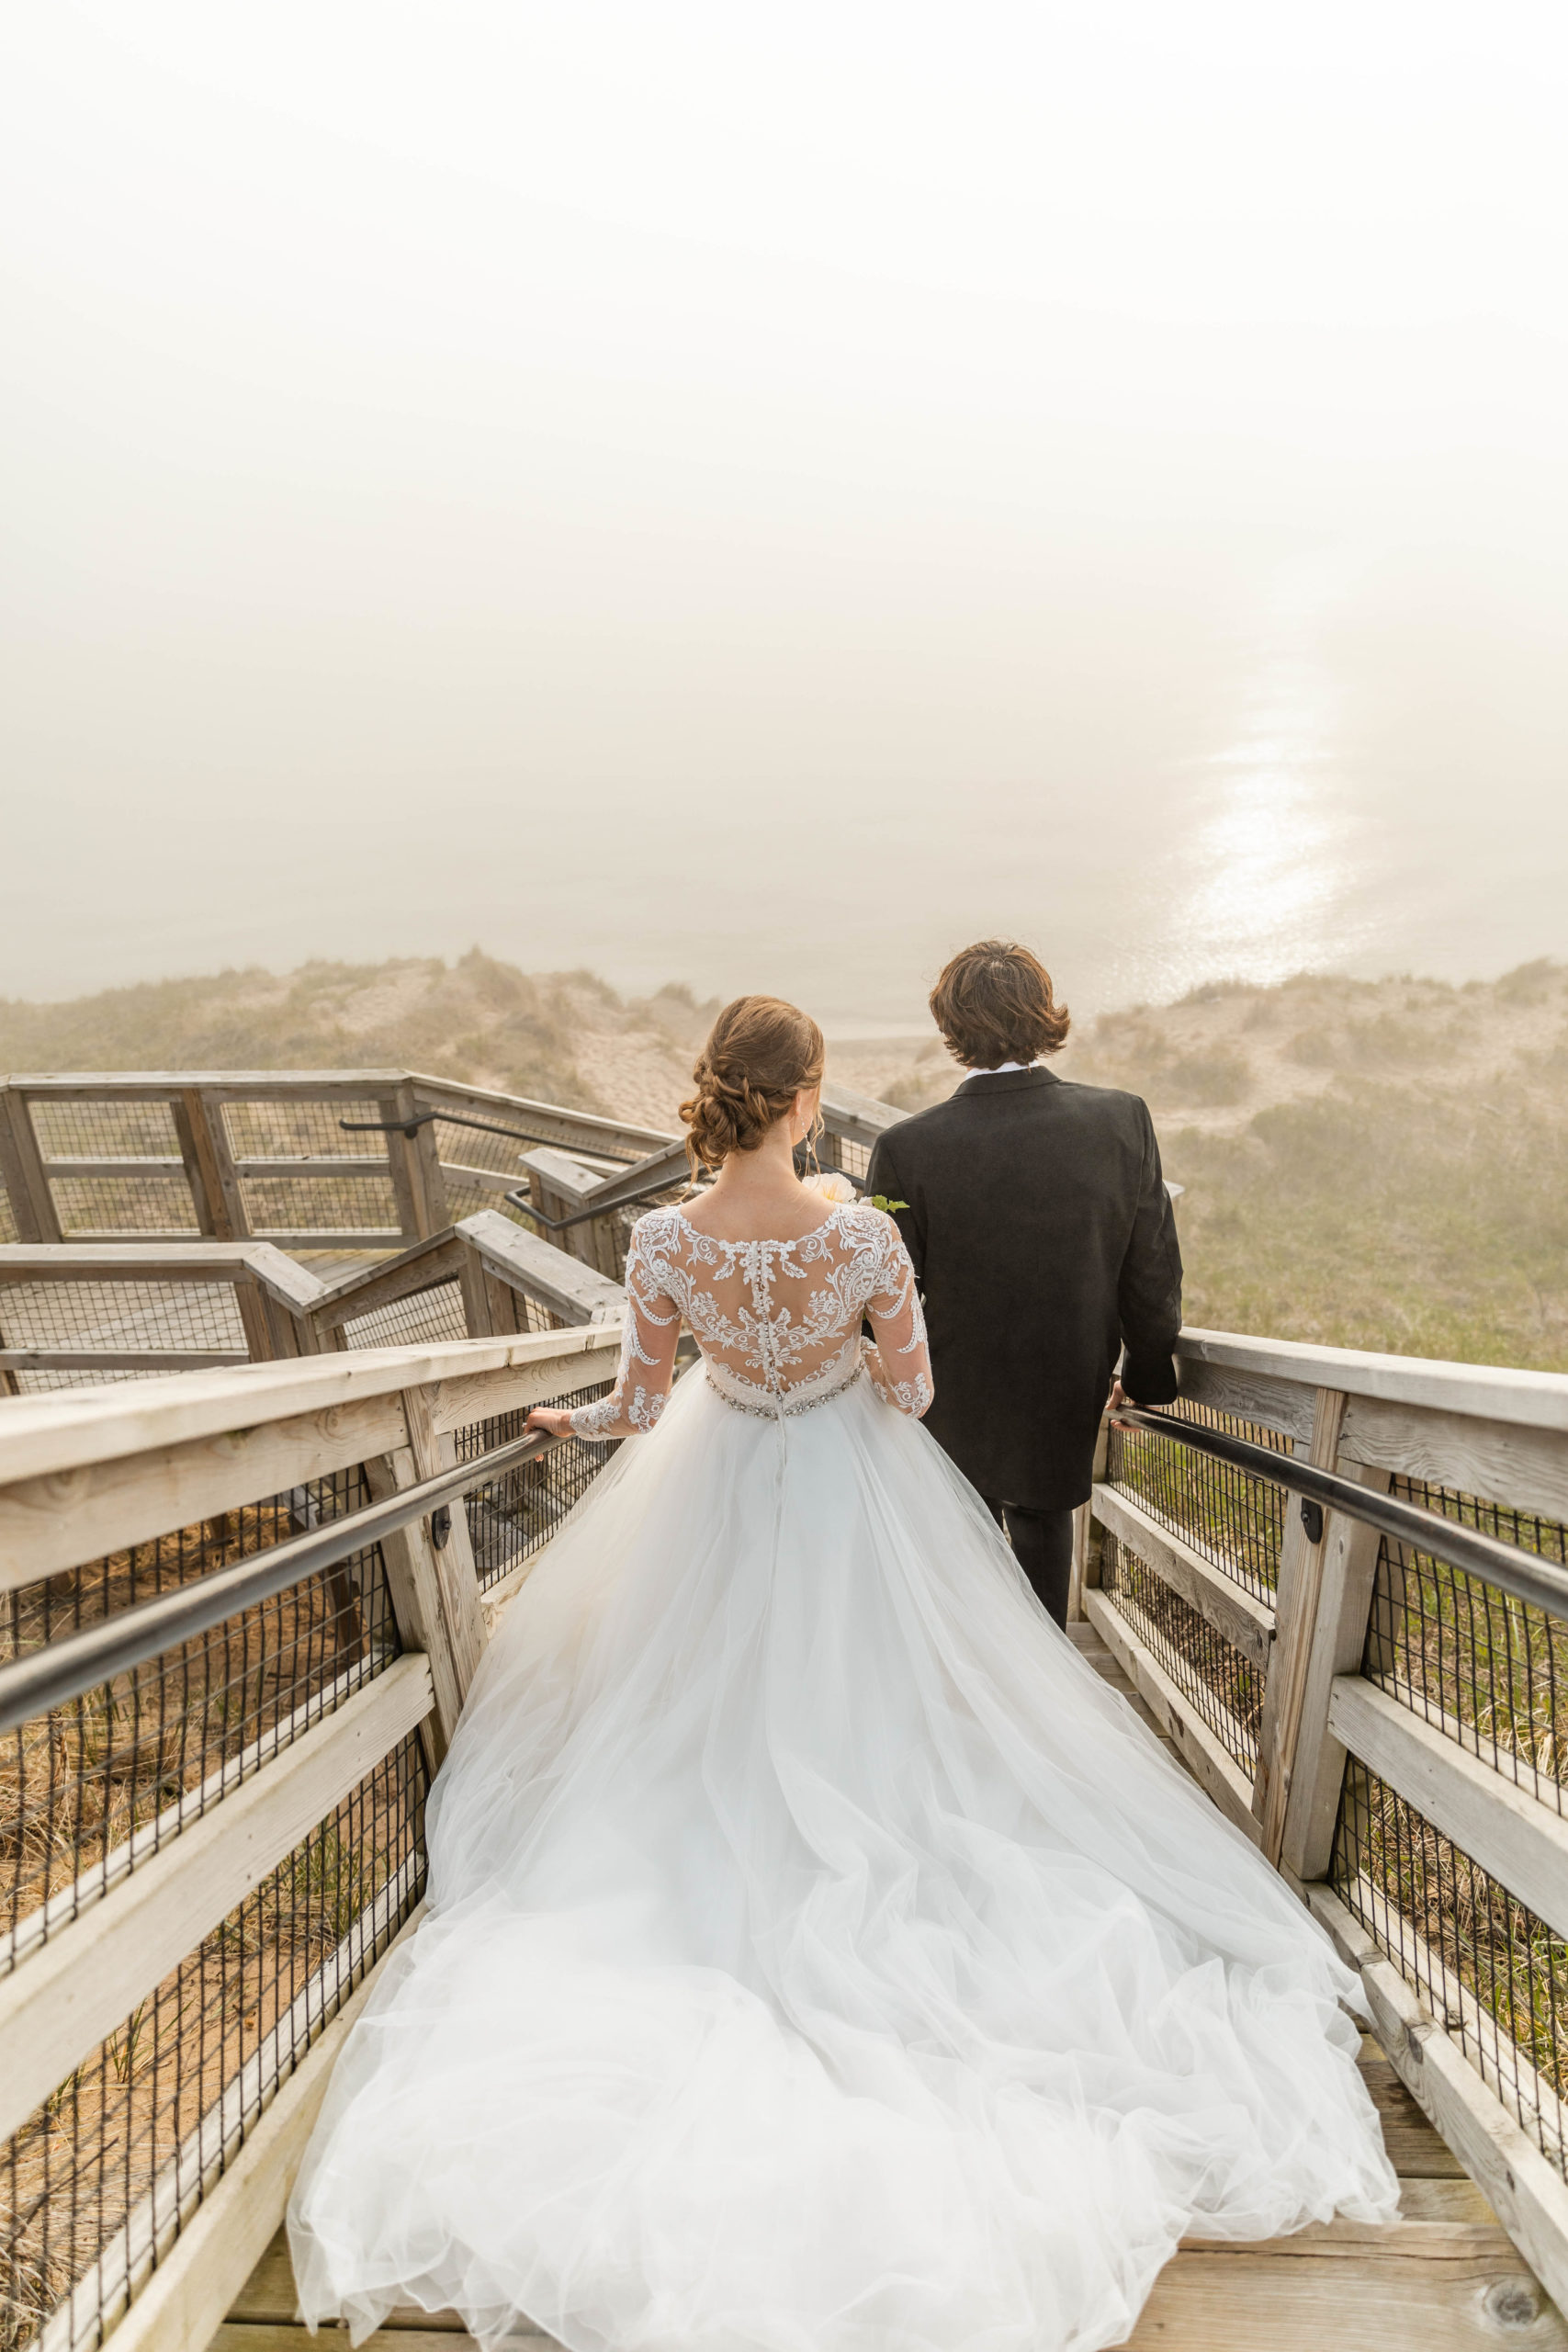 Michigan elopement wedding going down stairs through the dunes at the beach